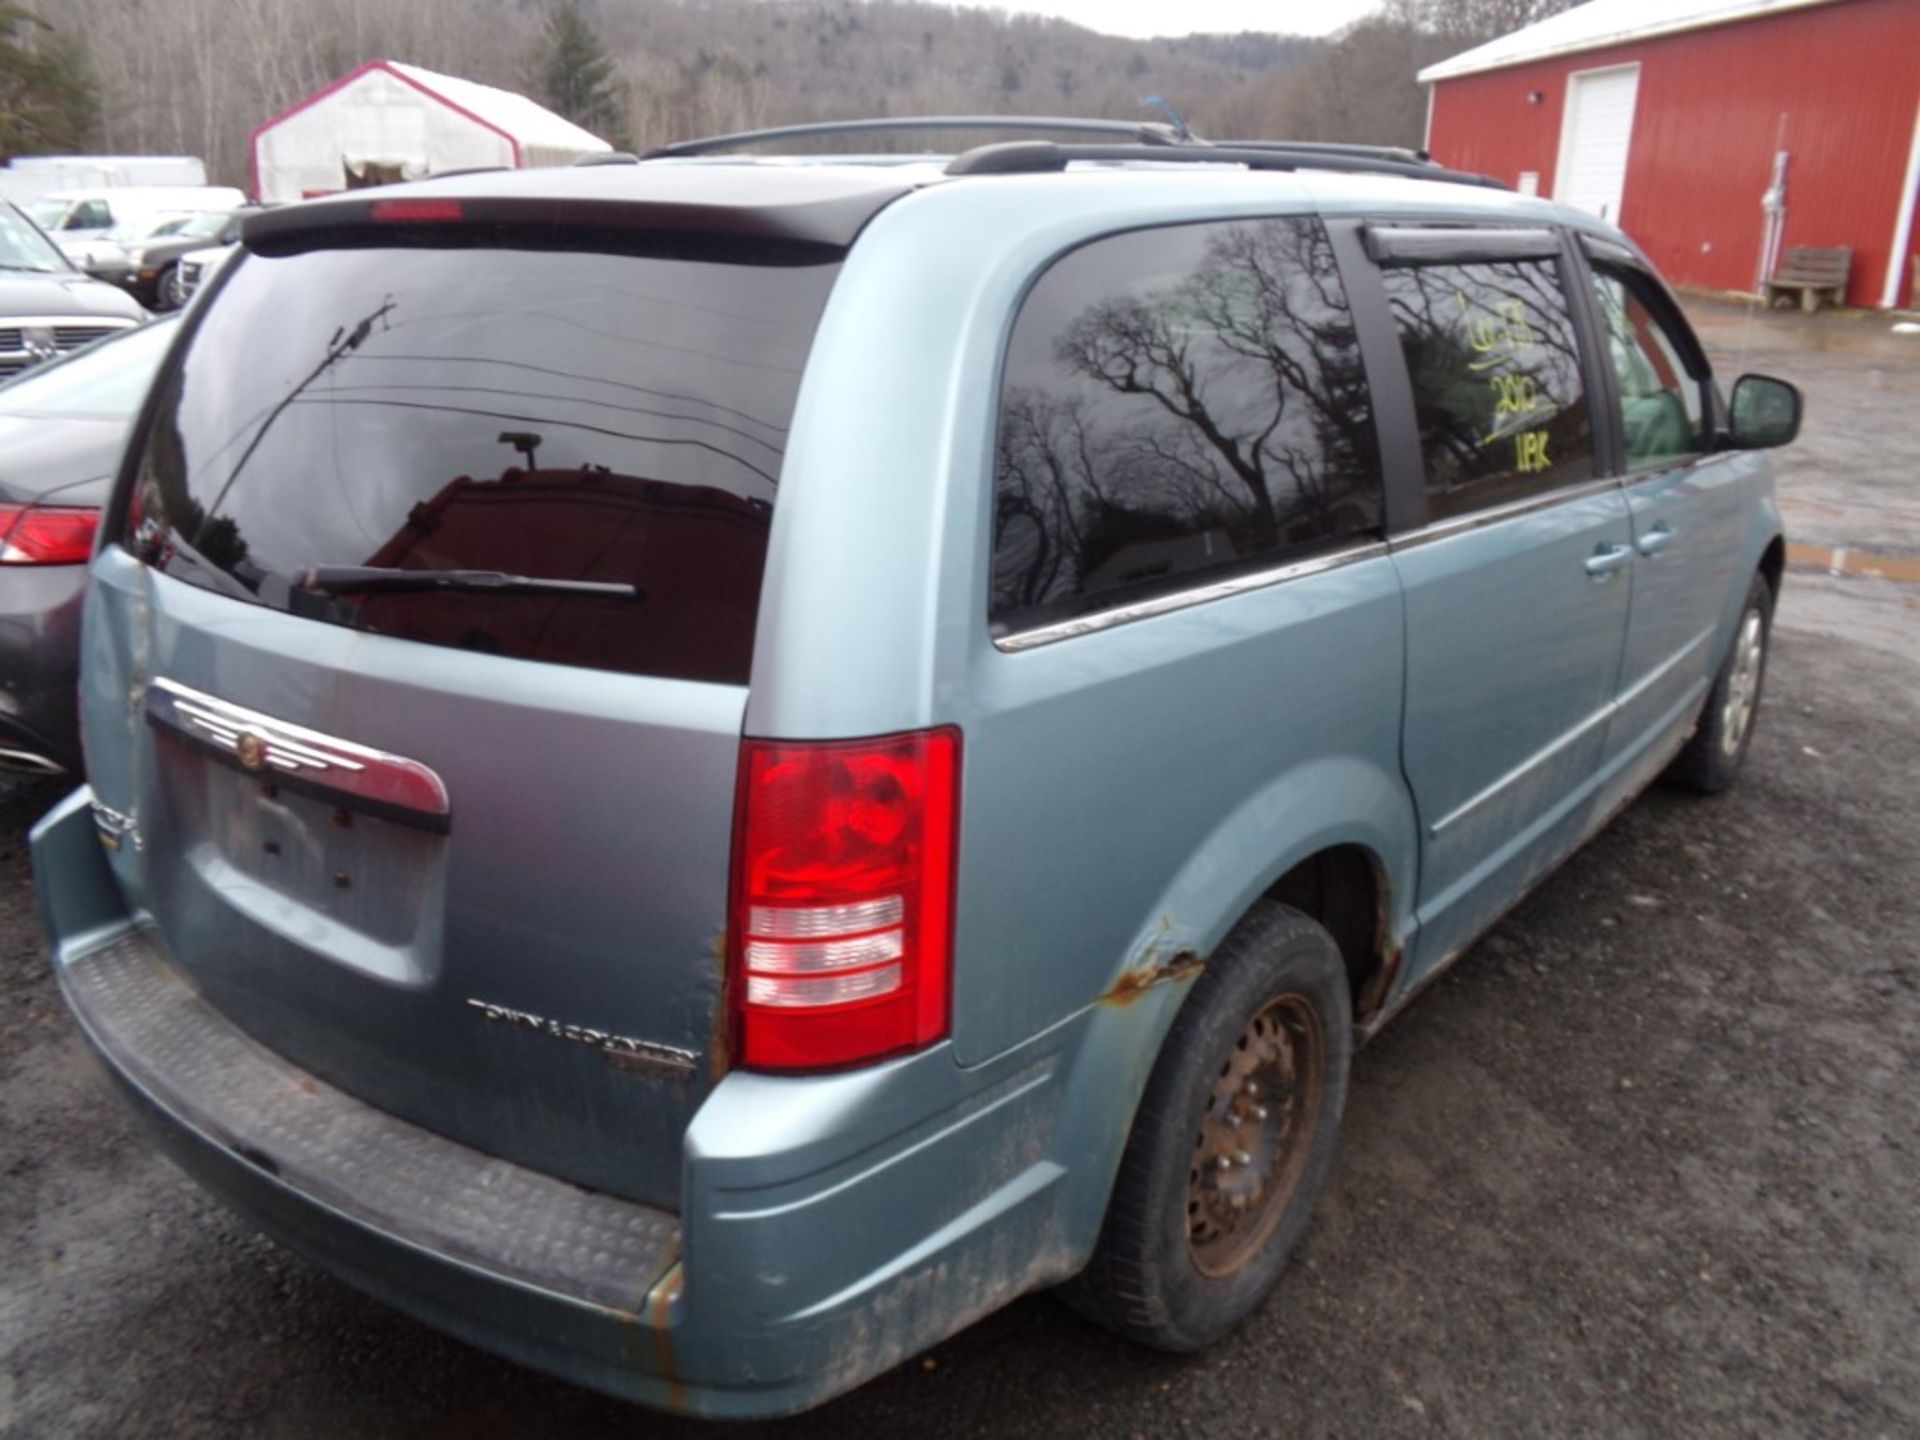 2010 Chrysler Town Country LX, Stow & Go Seating, Rear DVD, Blue, 119,559 Mi, Vin# 2A4RR4DE3AR105272 - Image 3 of 6